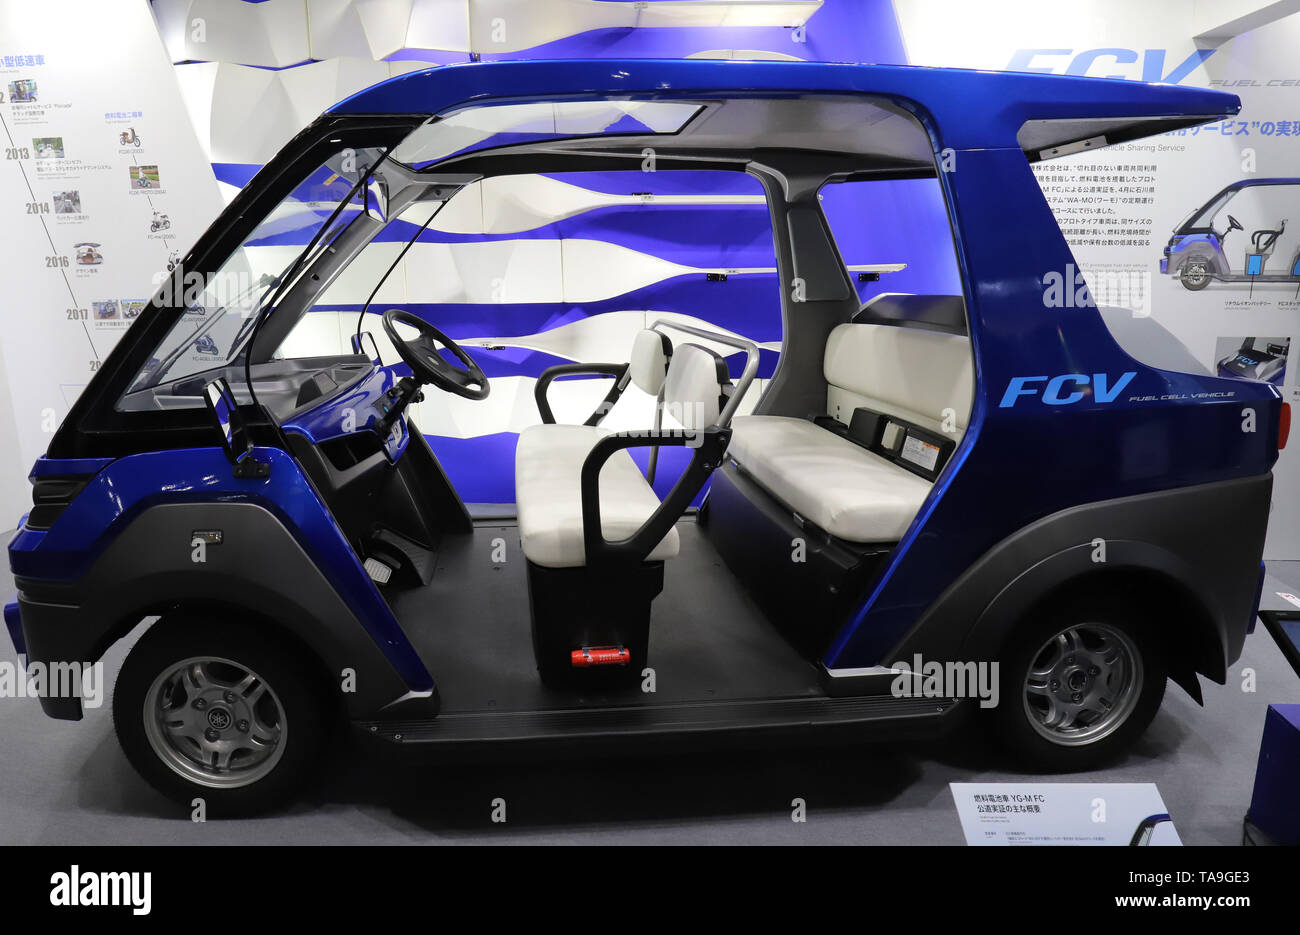 Yokohama Japan 22nd May 19 Japan S Motorcycle Giant Yamaha Motor Displays A Prototype Model Of Fuel Cell Cart Yg M Fc Which Can Drive 150km For A Charge Of Hydrogen At The Automotive